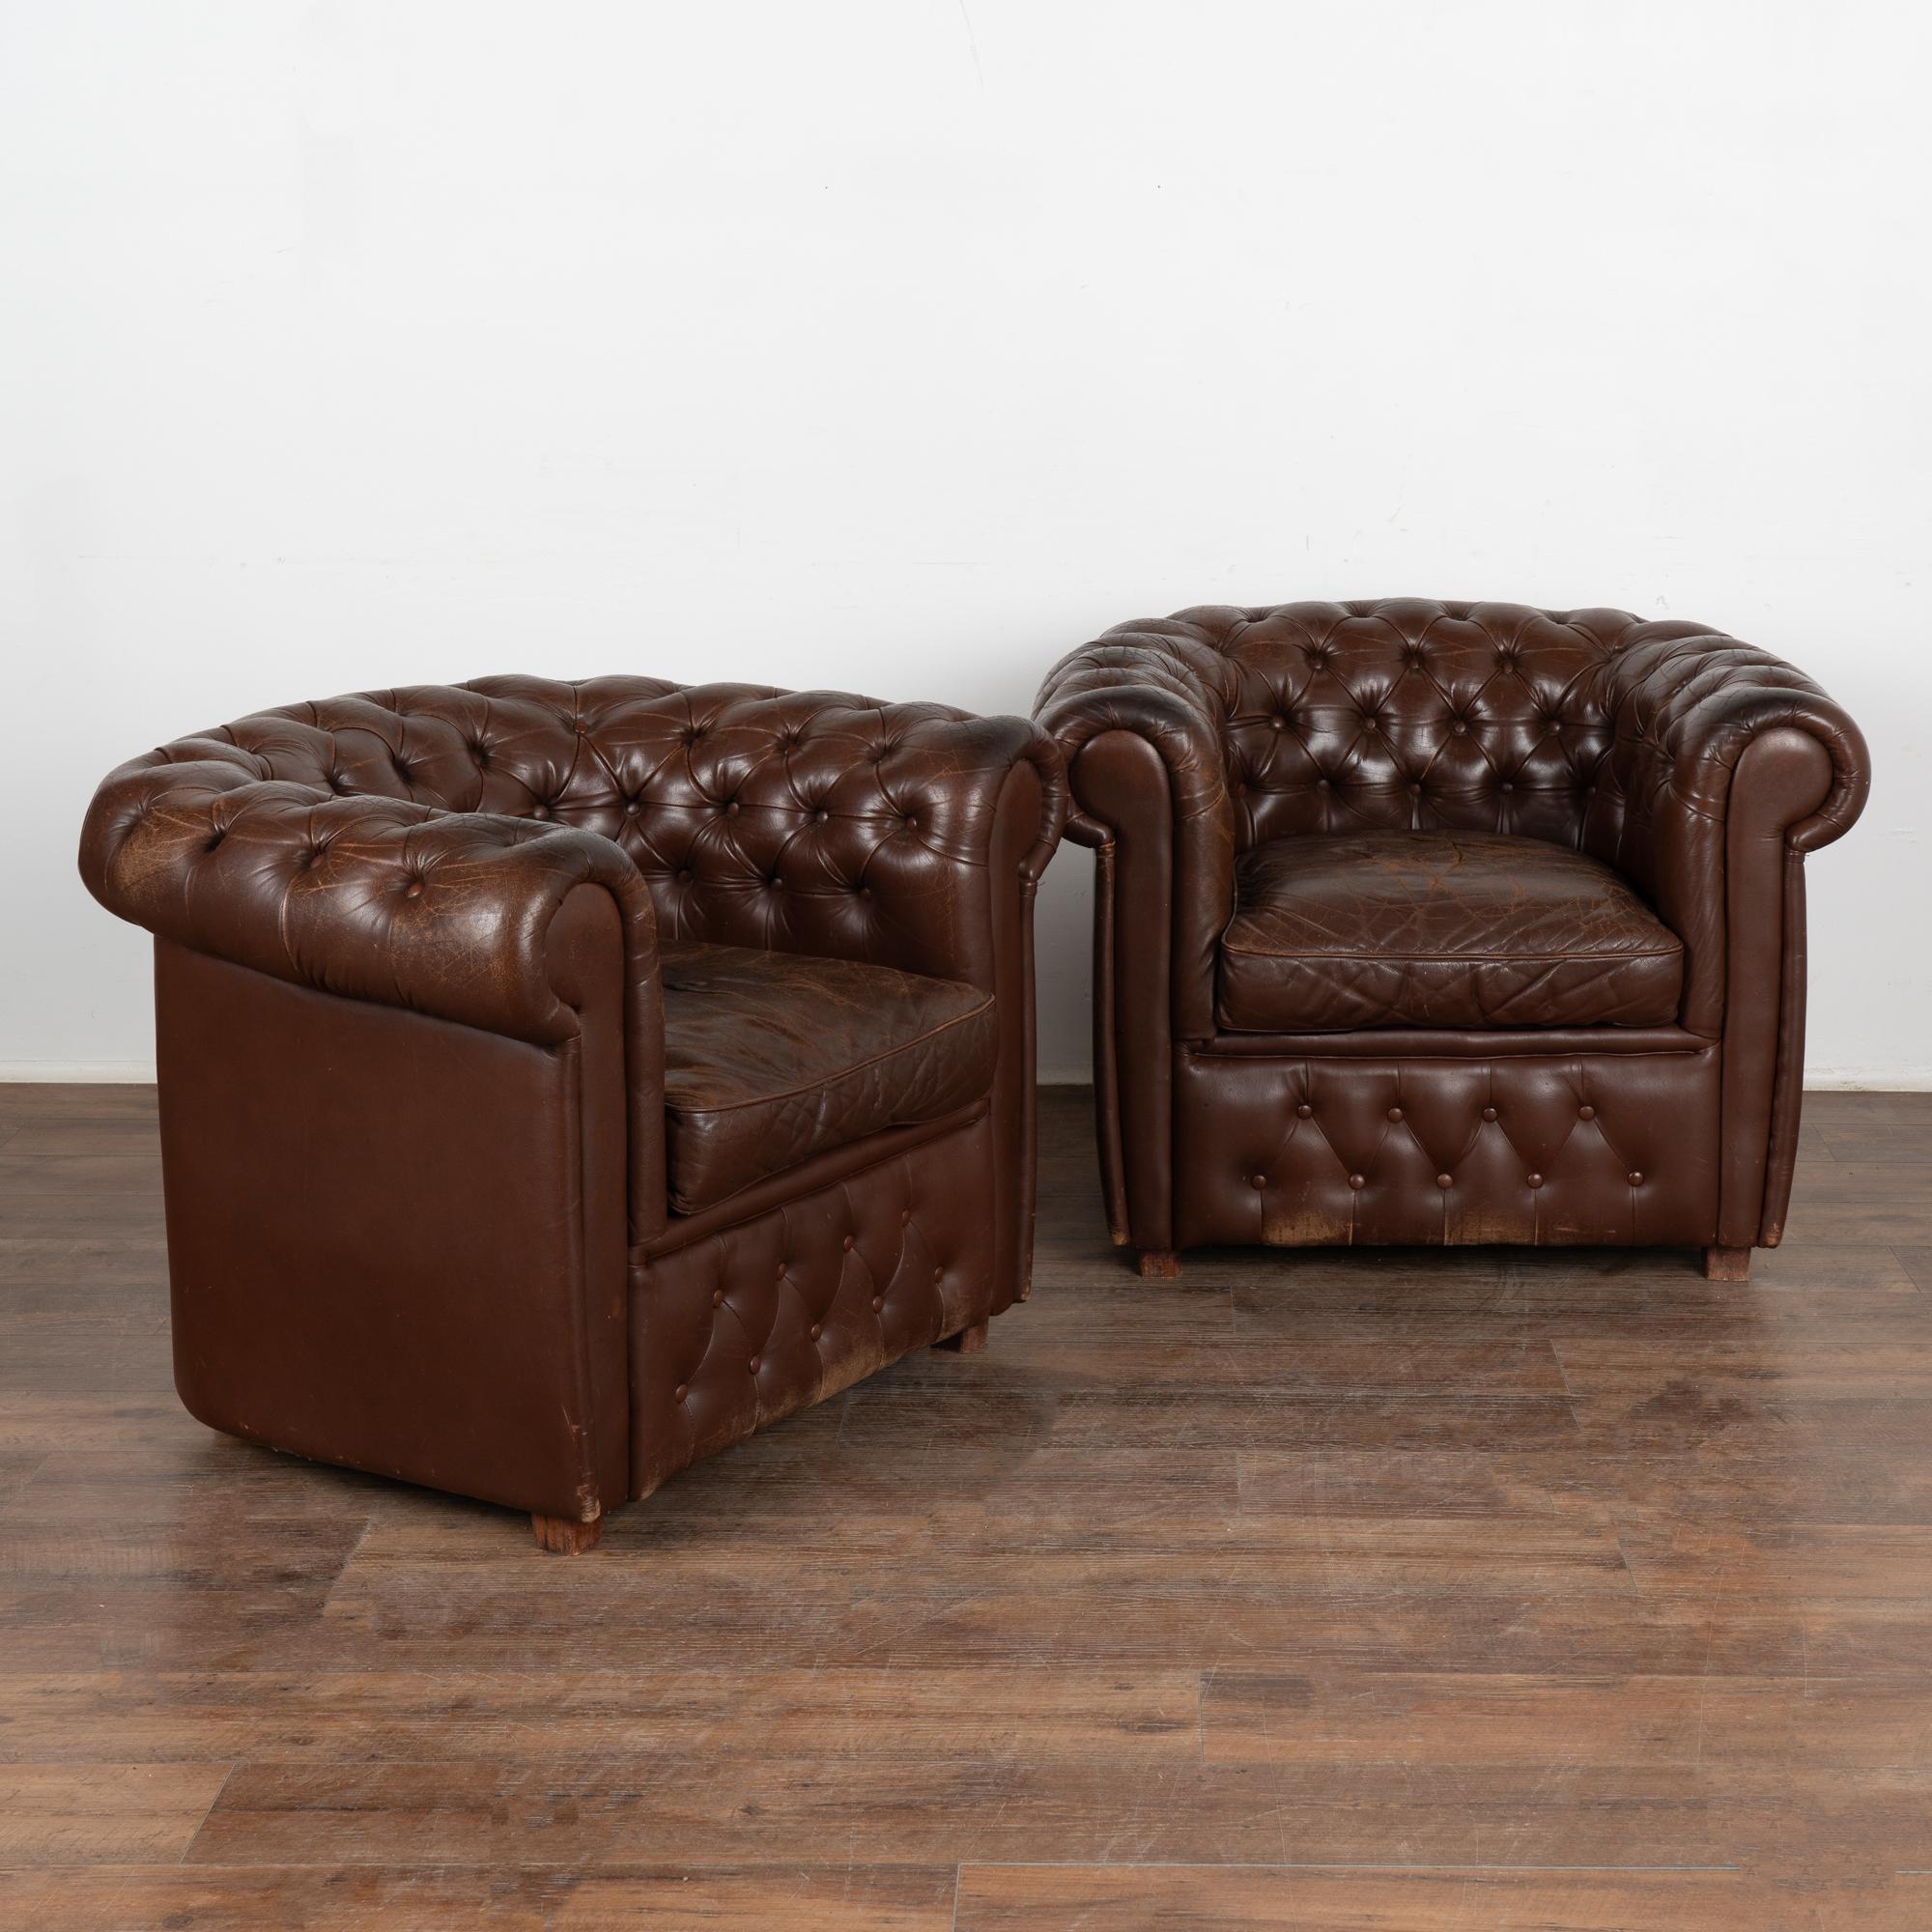 Chesterfield Style Brown Leather 3 Seat Sofa & 2 Club Chairs, circa 1920-40 In Good Condition For Sale In Round Top, TX